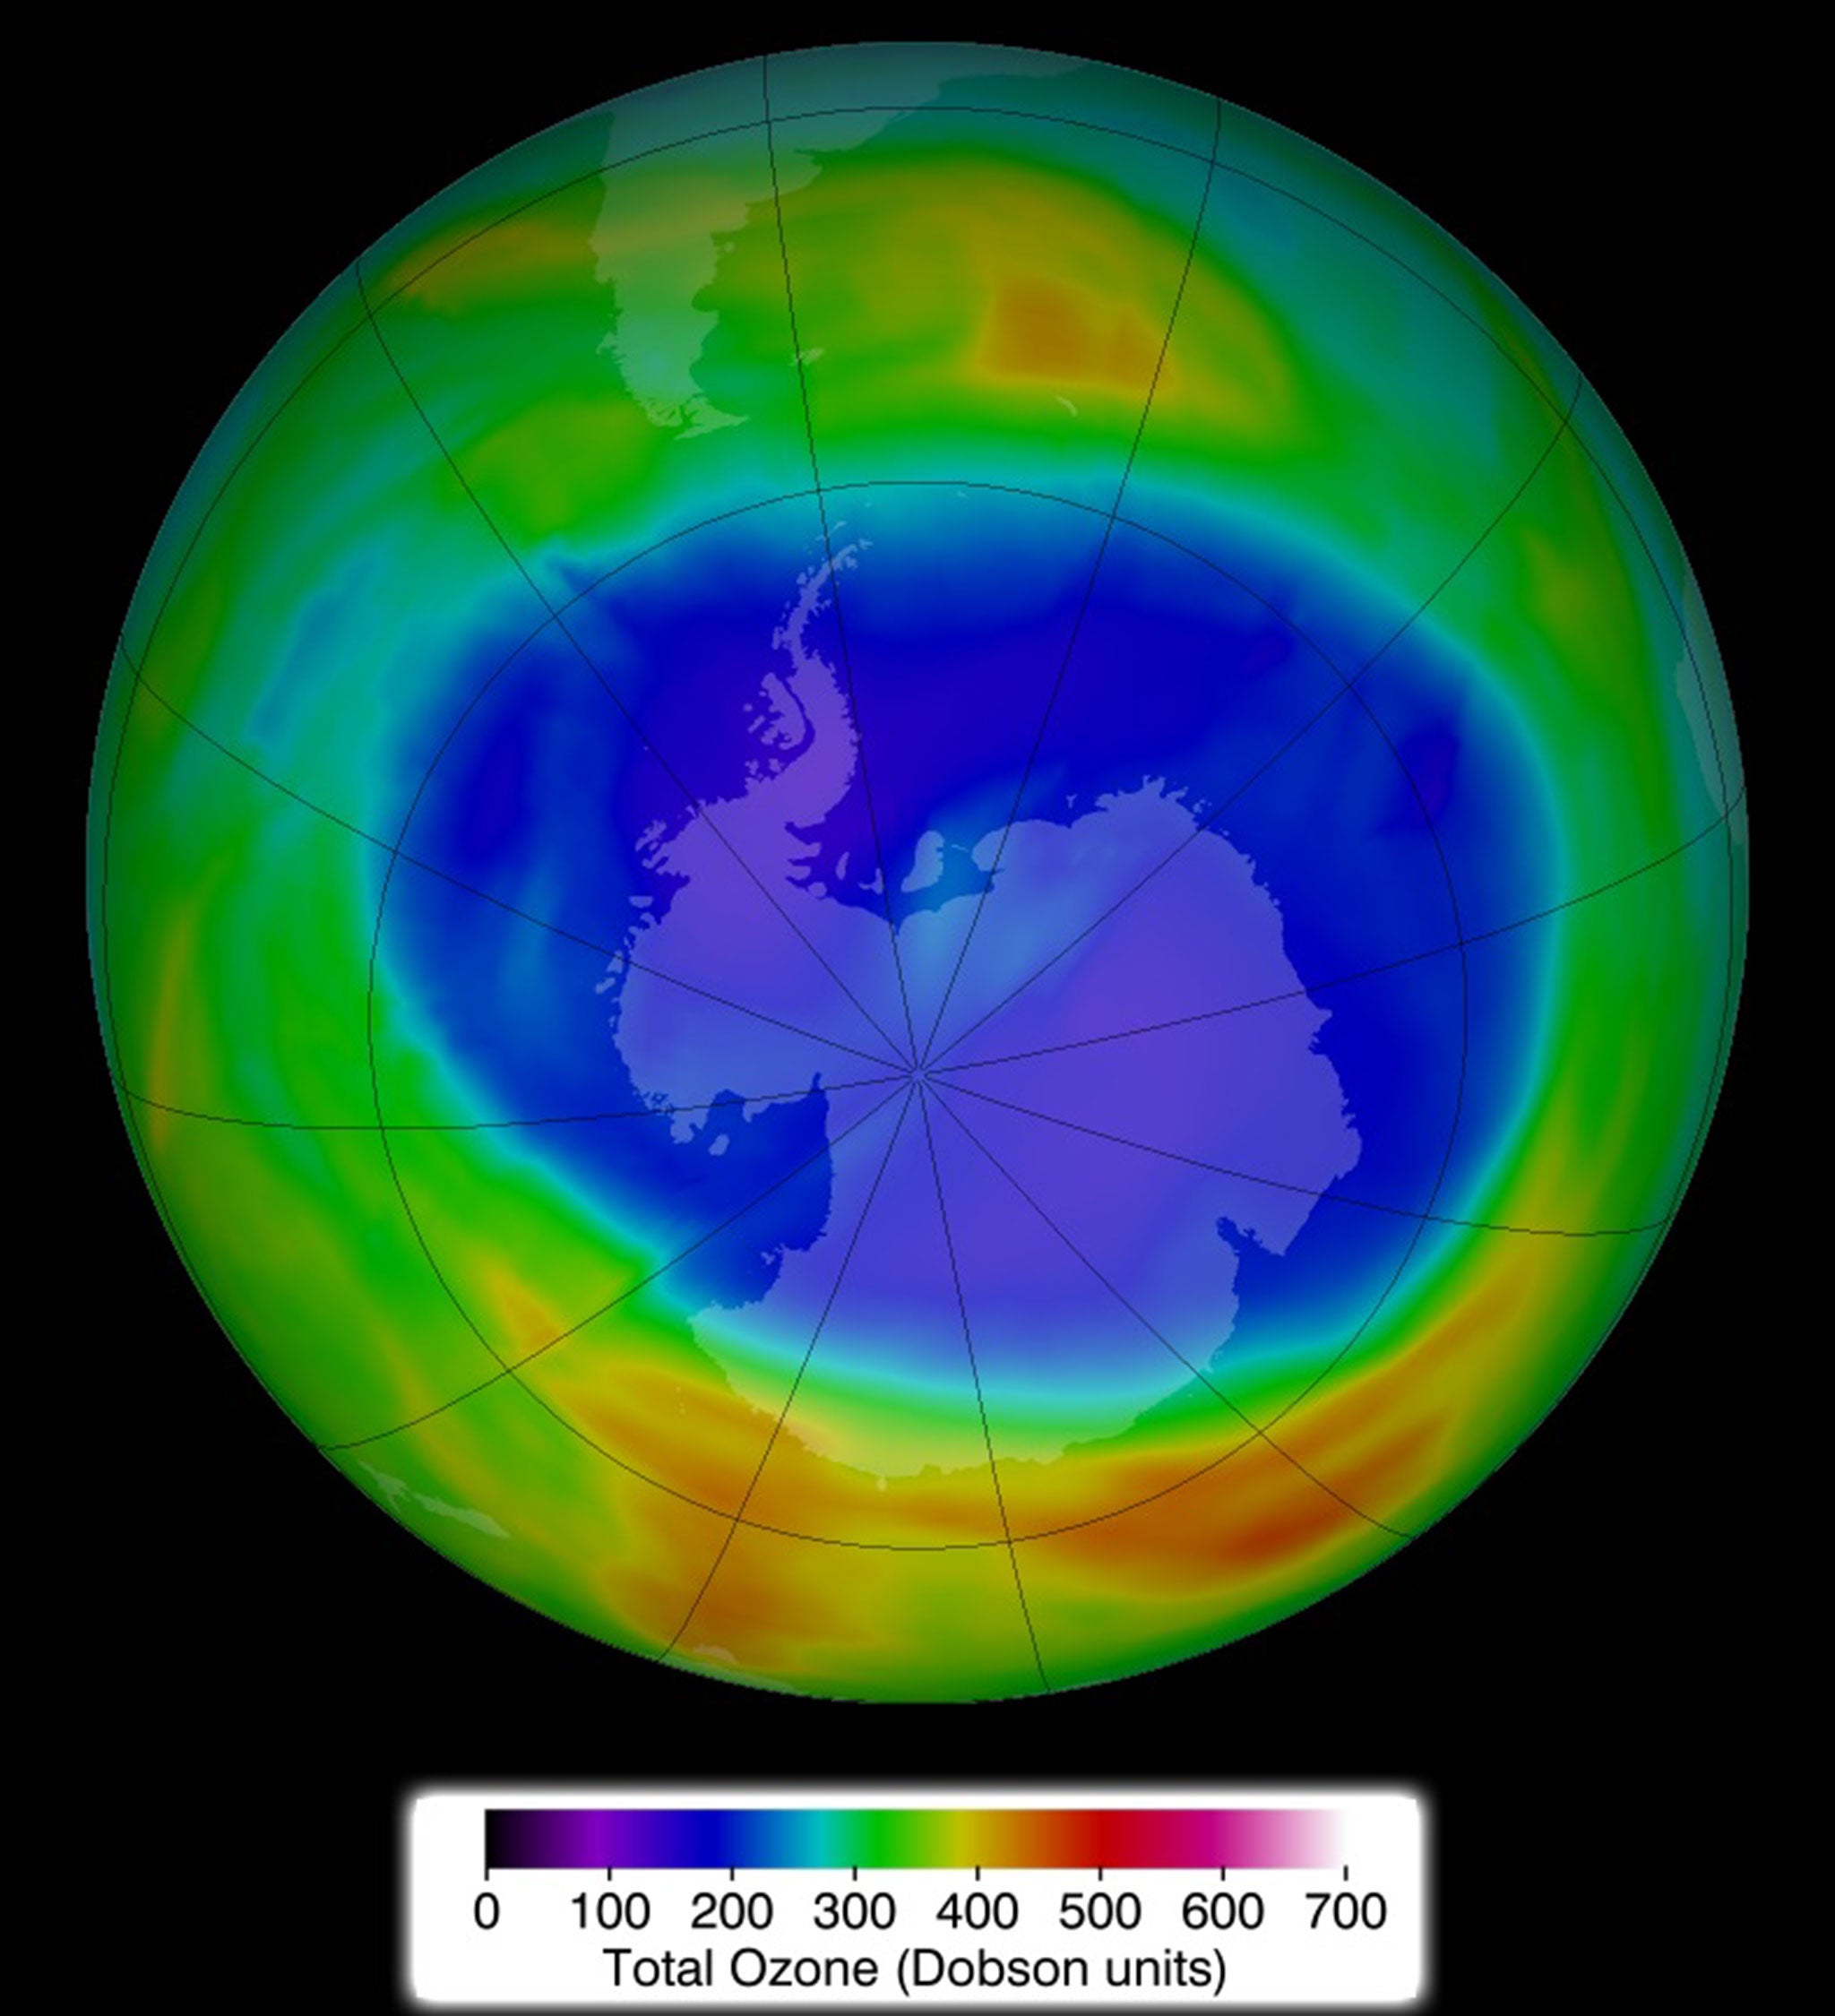 The hole in the Ozone over Antarctica on 11 September 2014